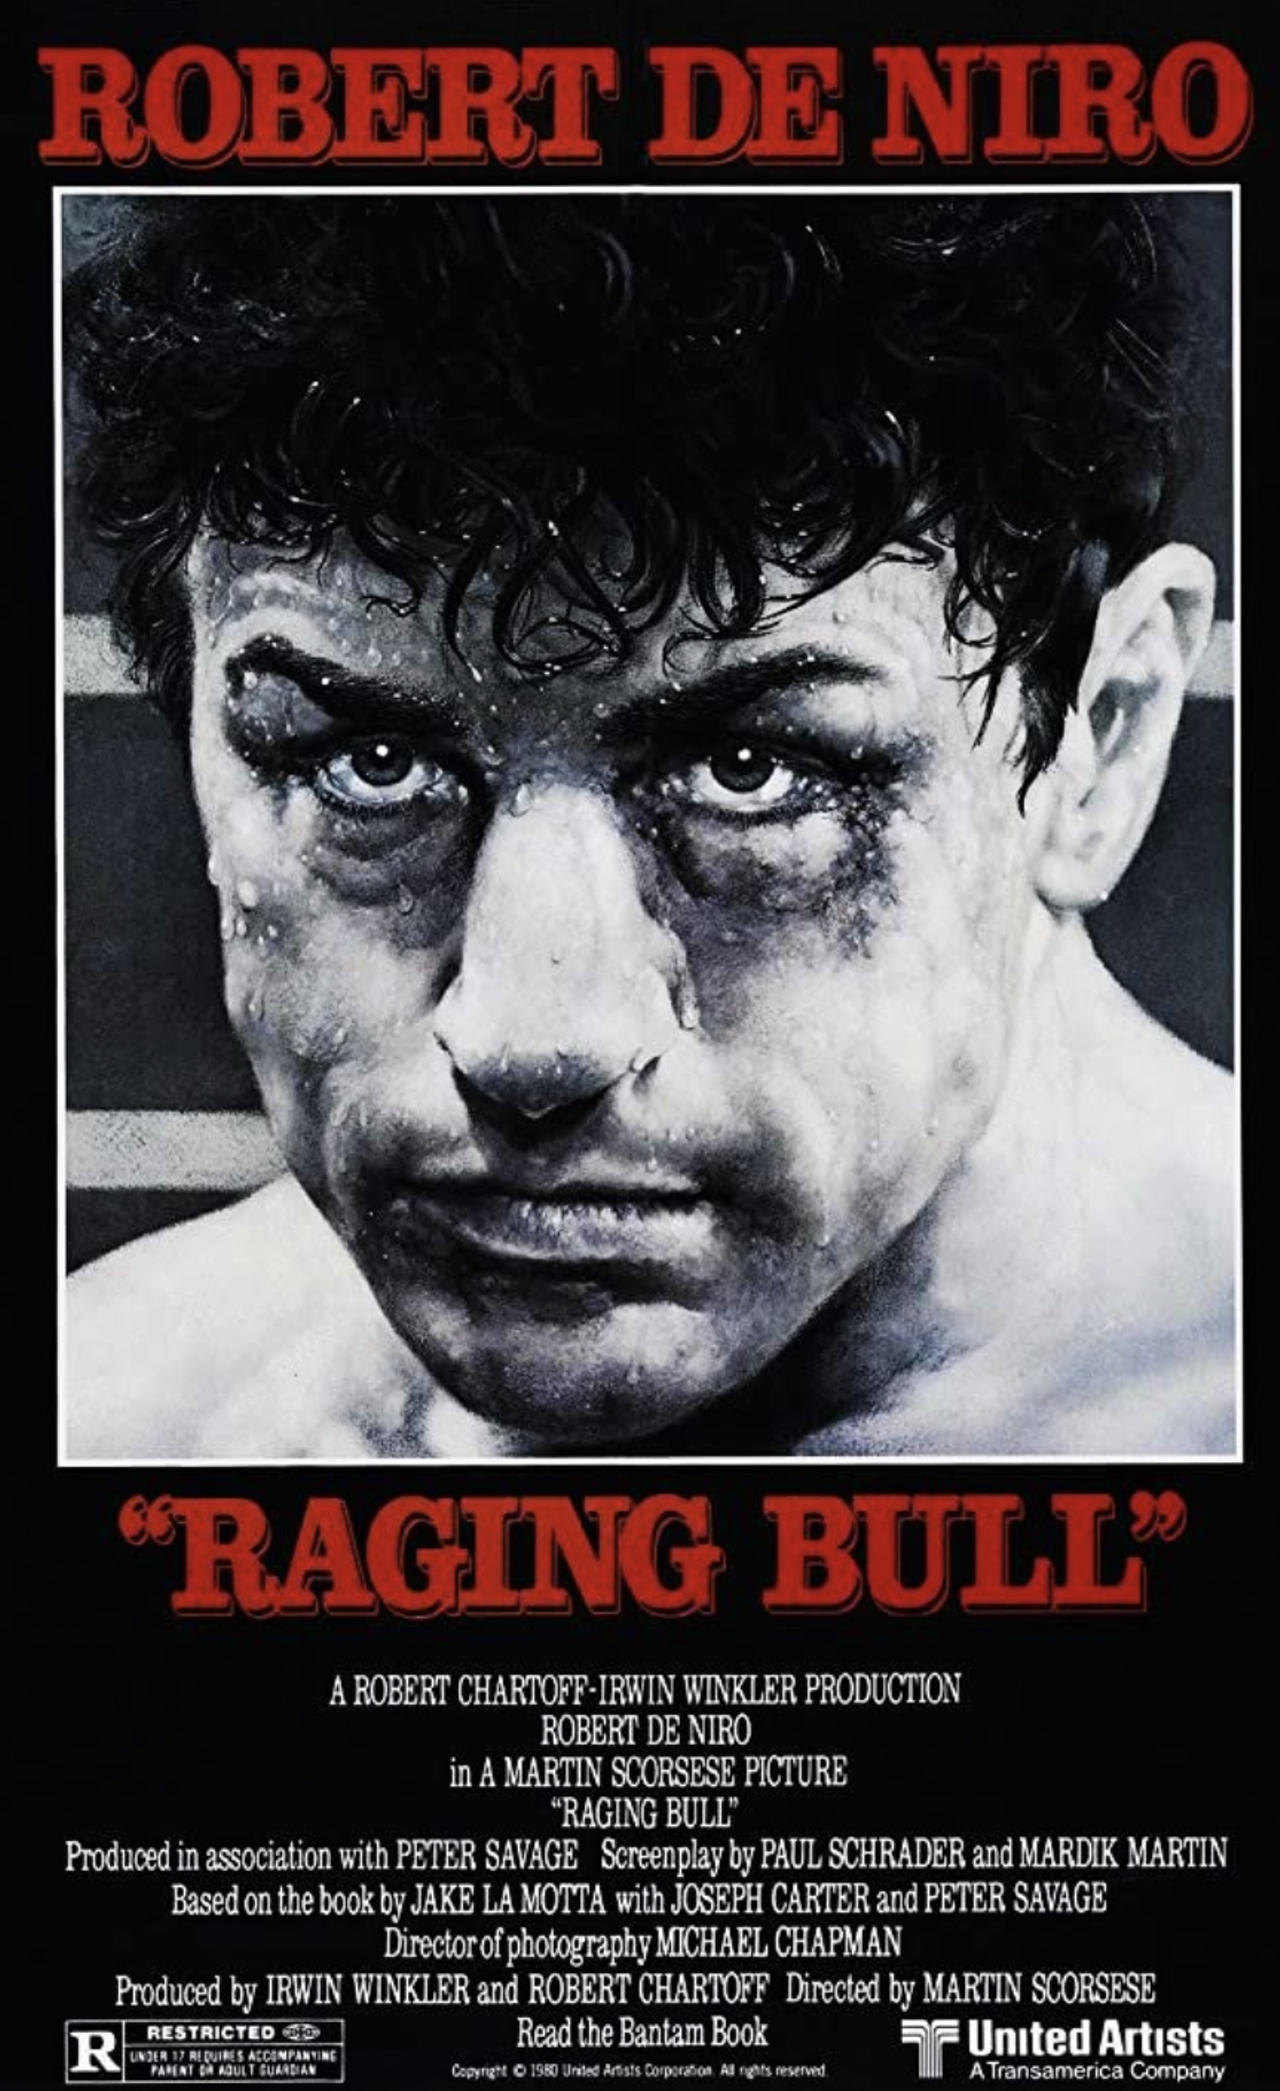   Raging Bull  (1980) 
This 1980 film from Martin Scorsese is considered a classic in American cinema. Following boxer Jake Lamotta, played by Robert De Niro, the climactic fight in the film takes place in the old Cleveland Arena, which had been demolished in 1977. The film is currently streaming on Max, Amazon Prime and Hulu.